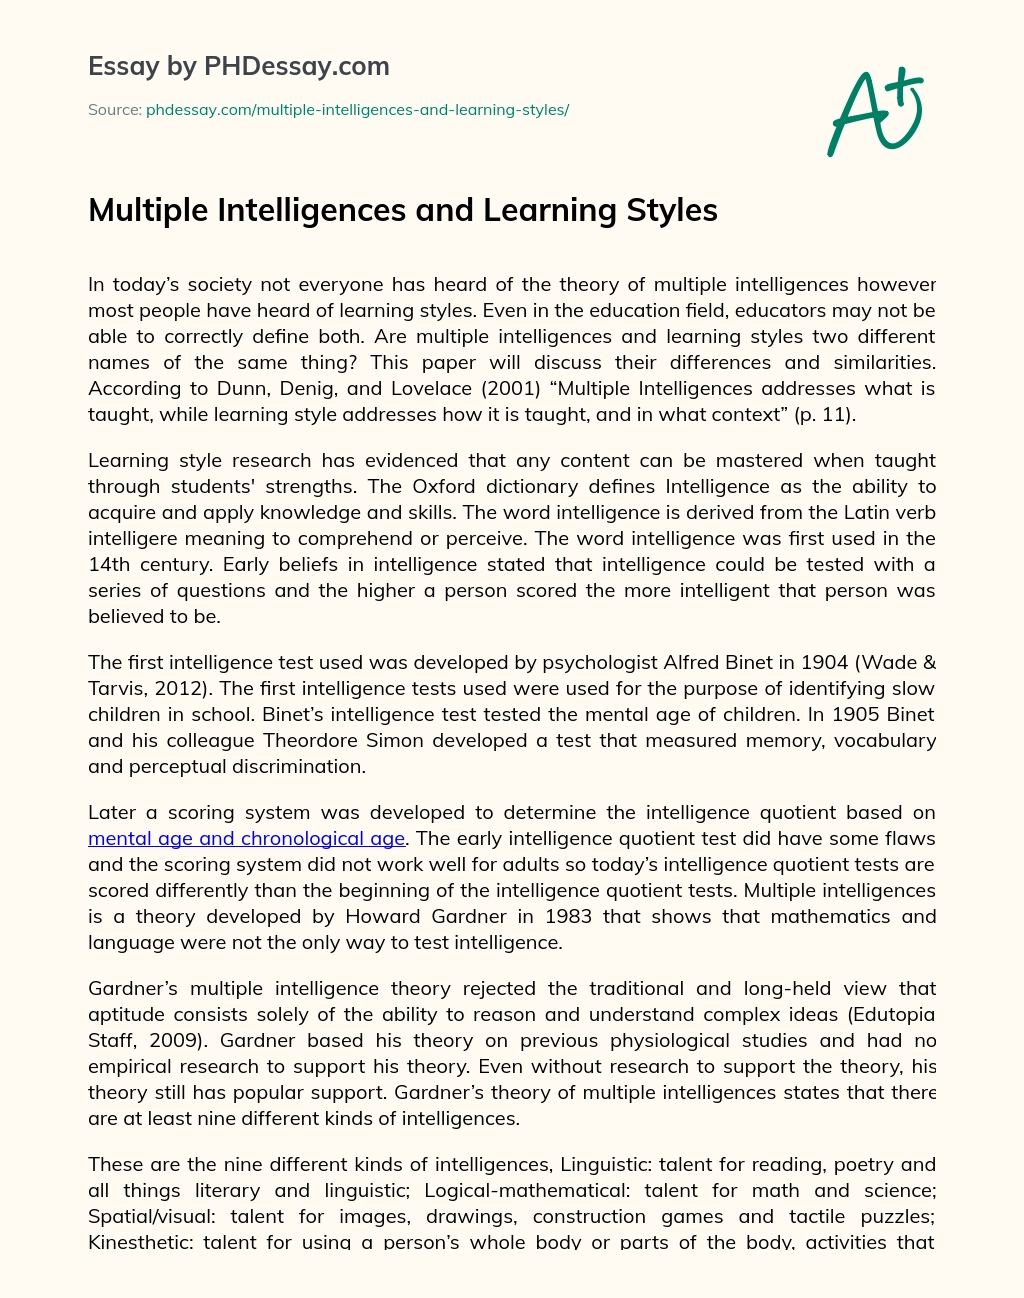 Multiple Intelligences and Learning Styles essay